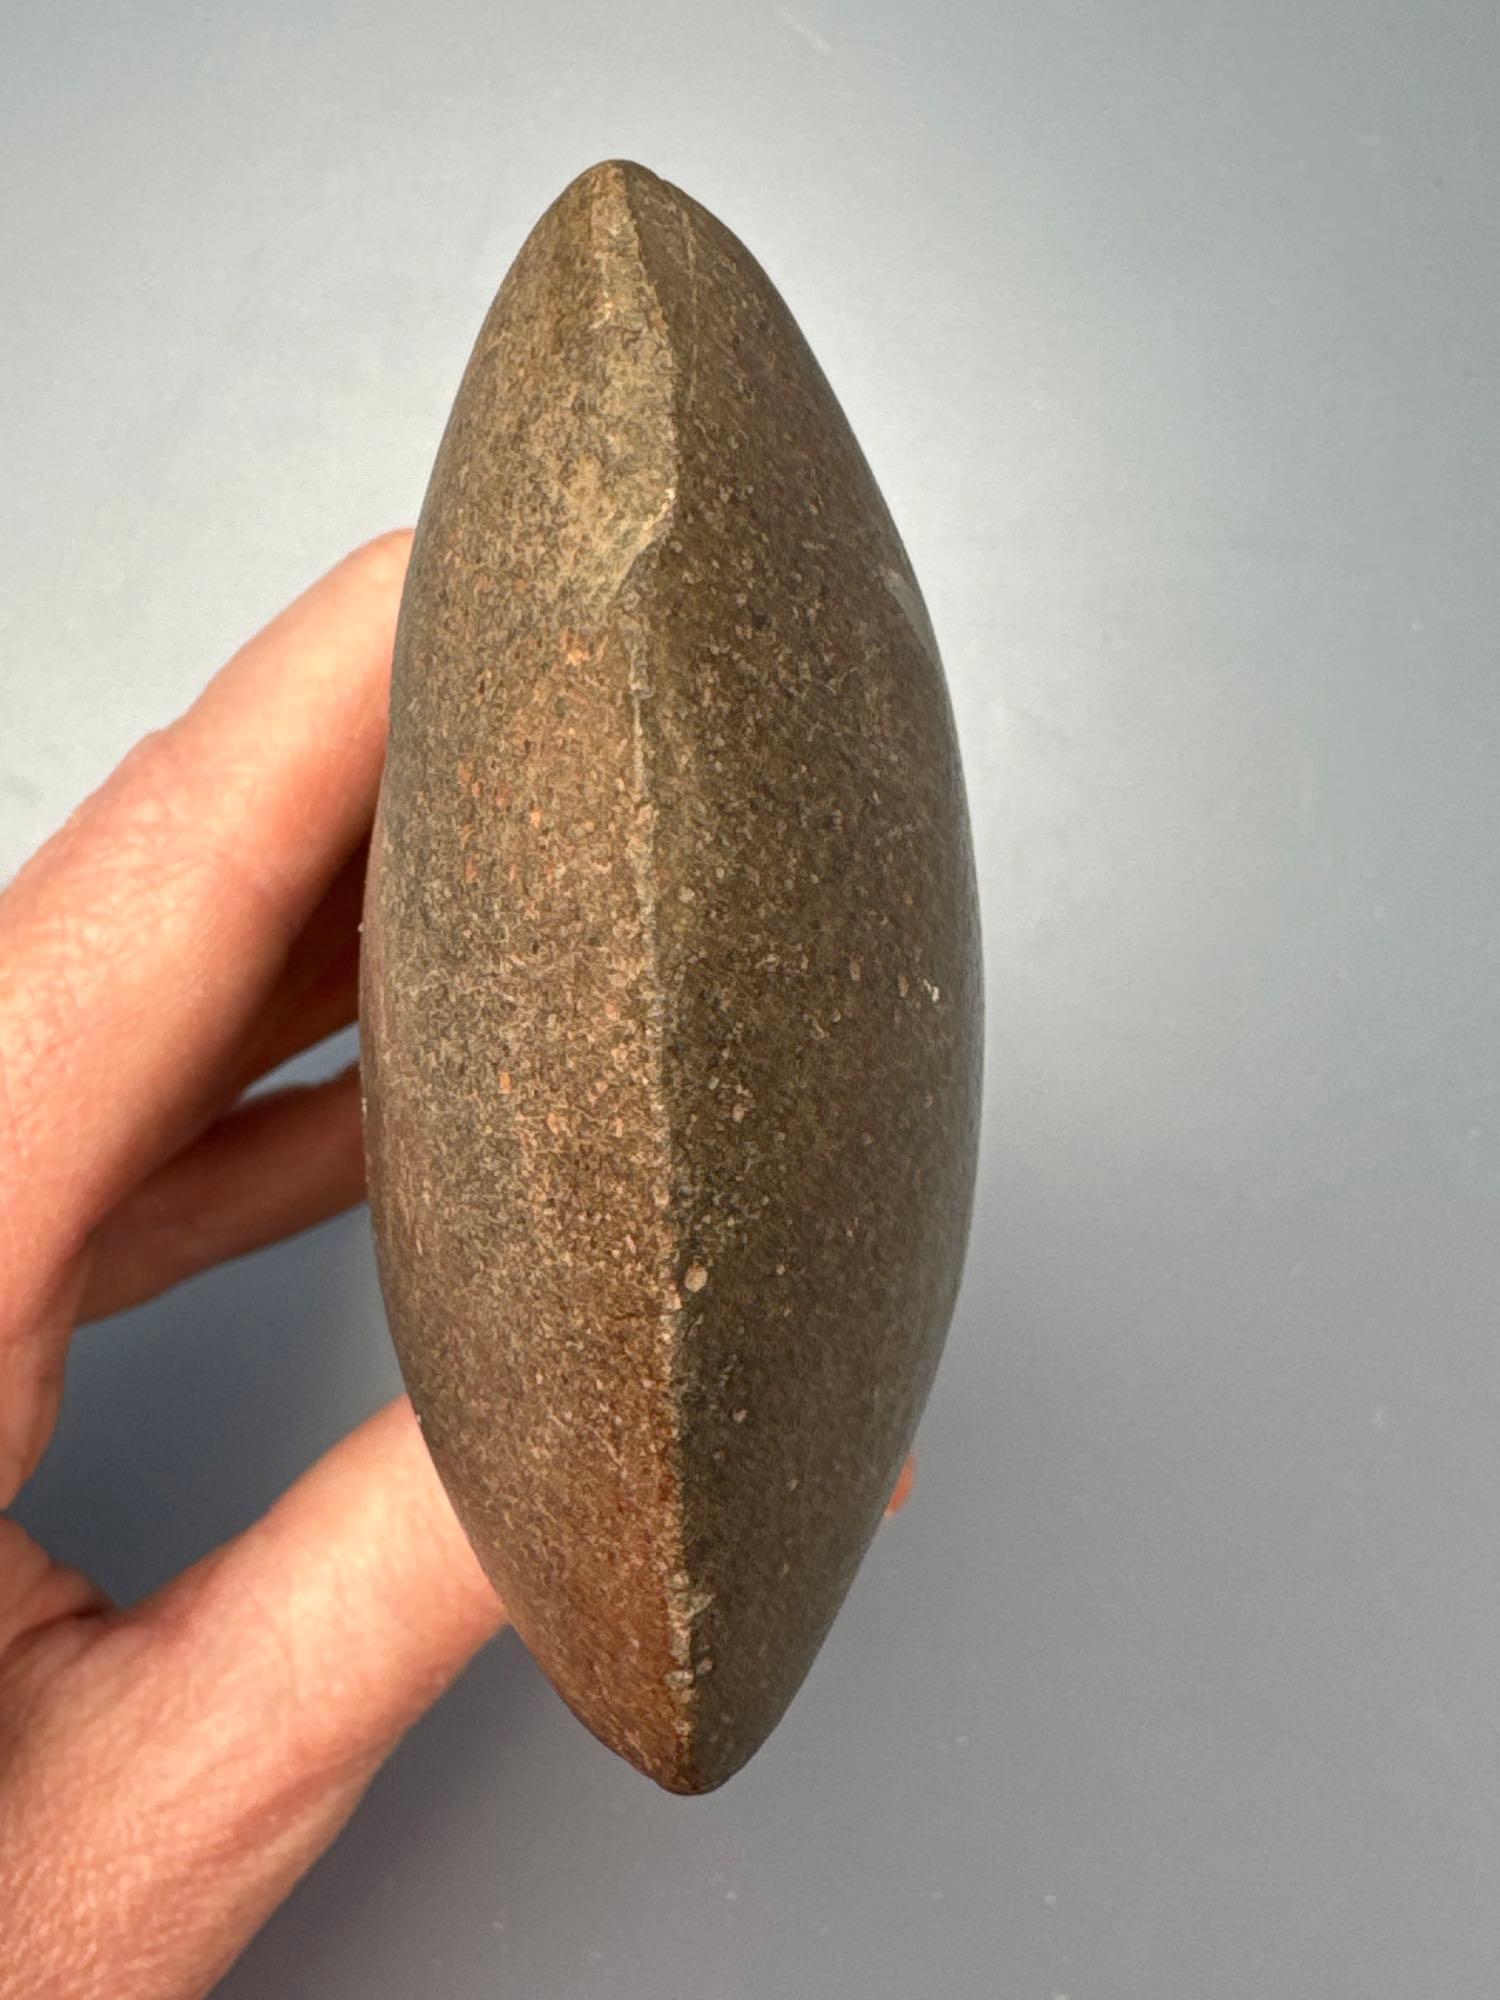 4 3/4" Flared Bit Celt, Polished Bit, This and others were found in fields next to the Conn. River i